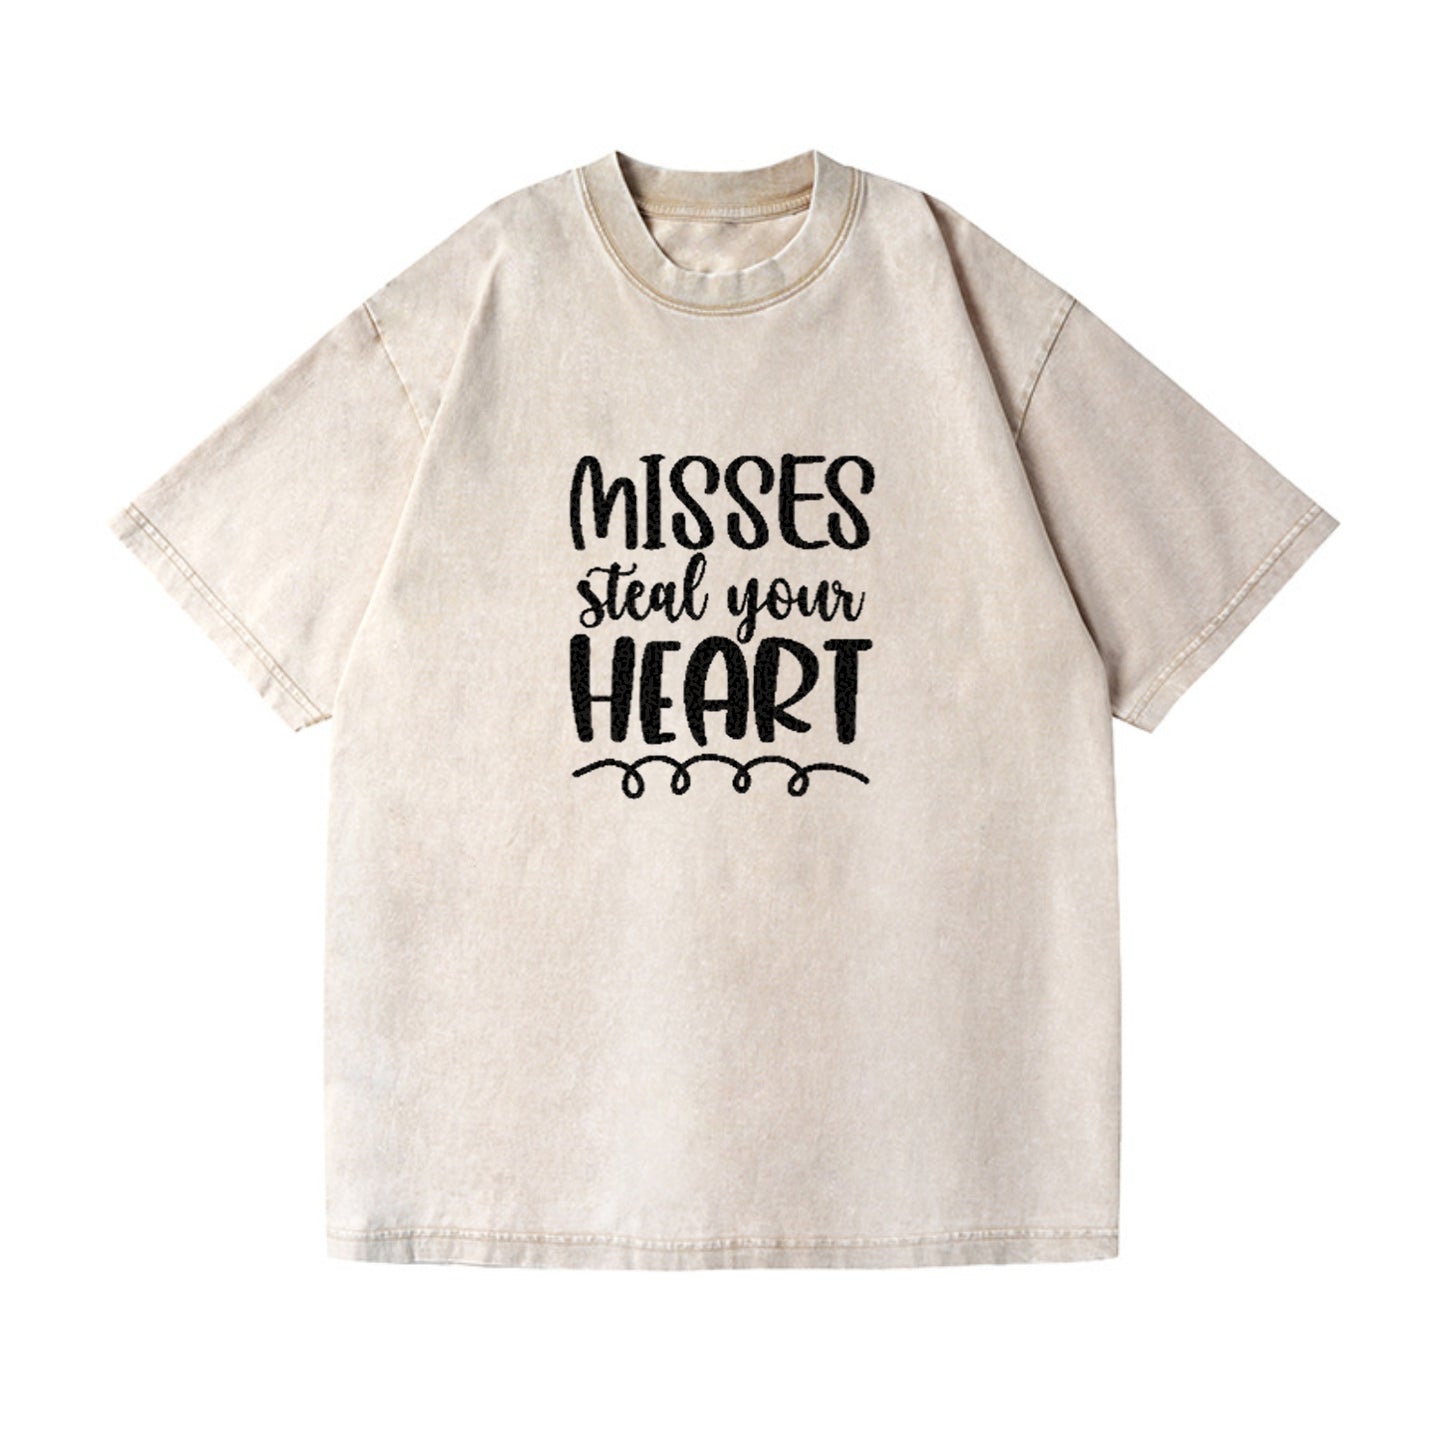 misses steal your heart Hat